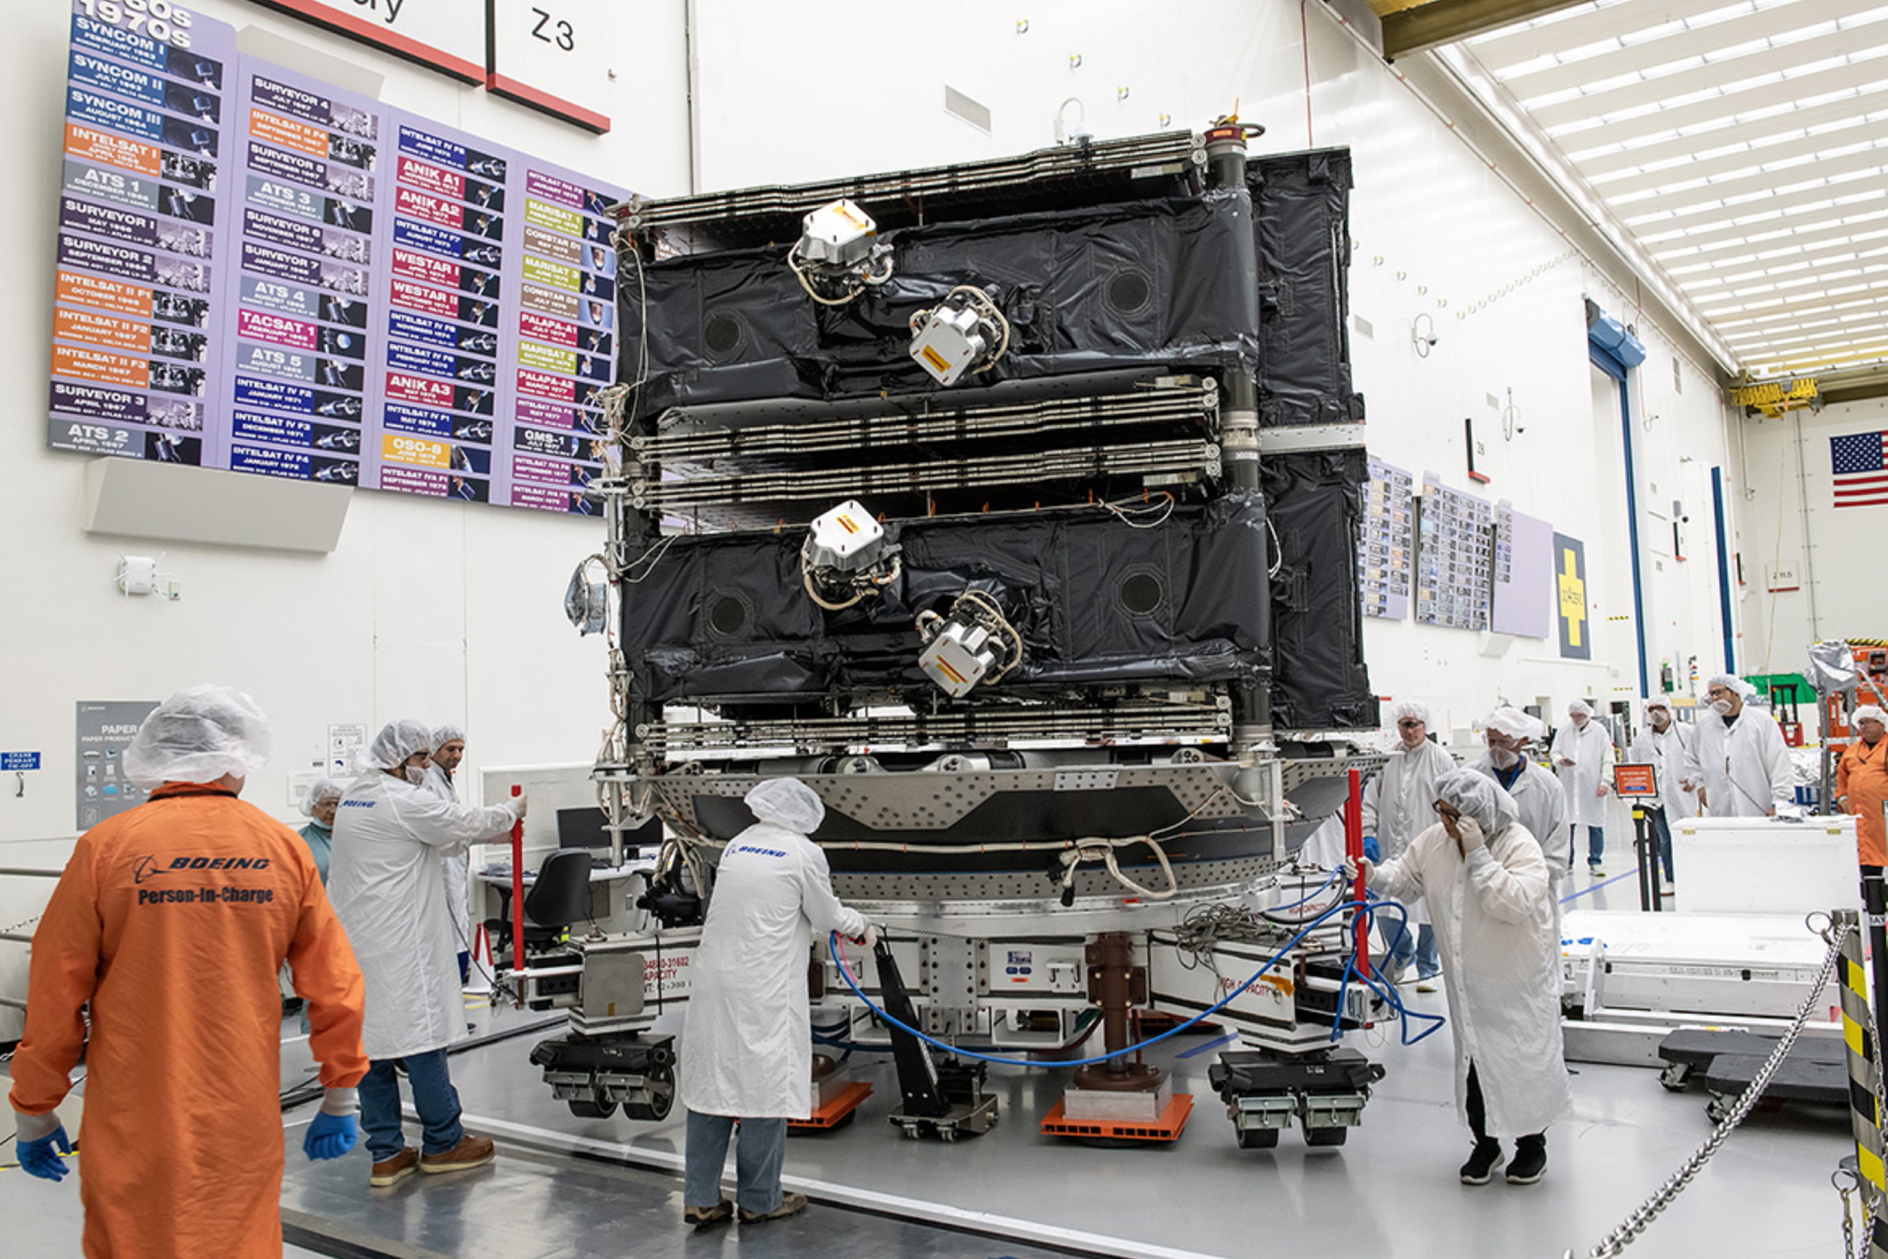 Boeing O3b mPOWER satellites. Click to enlarge.